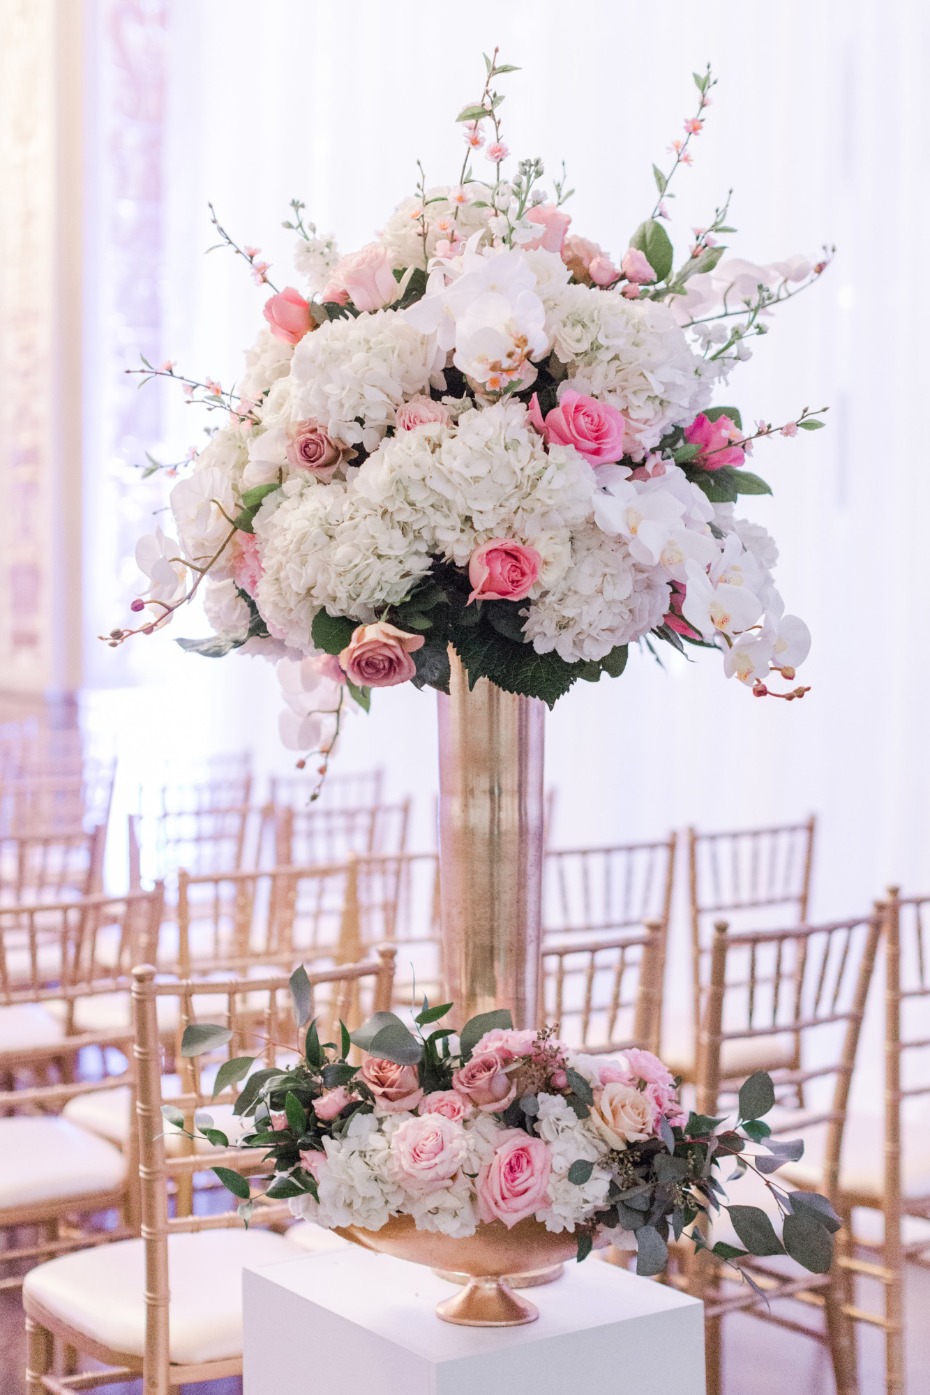 Tall ceremony bouquet